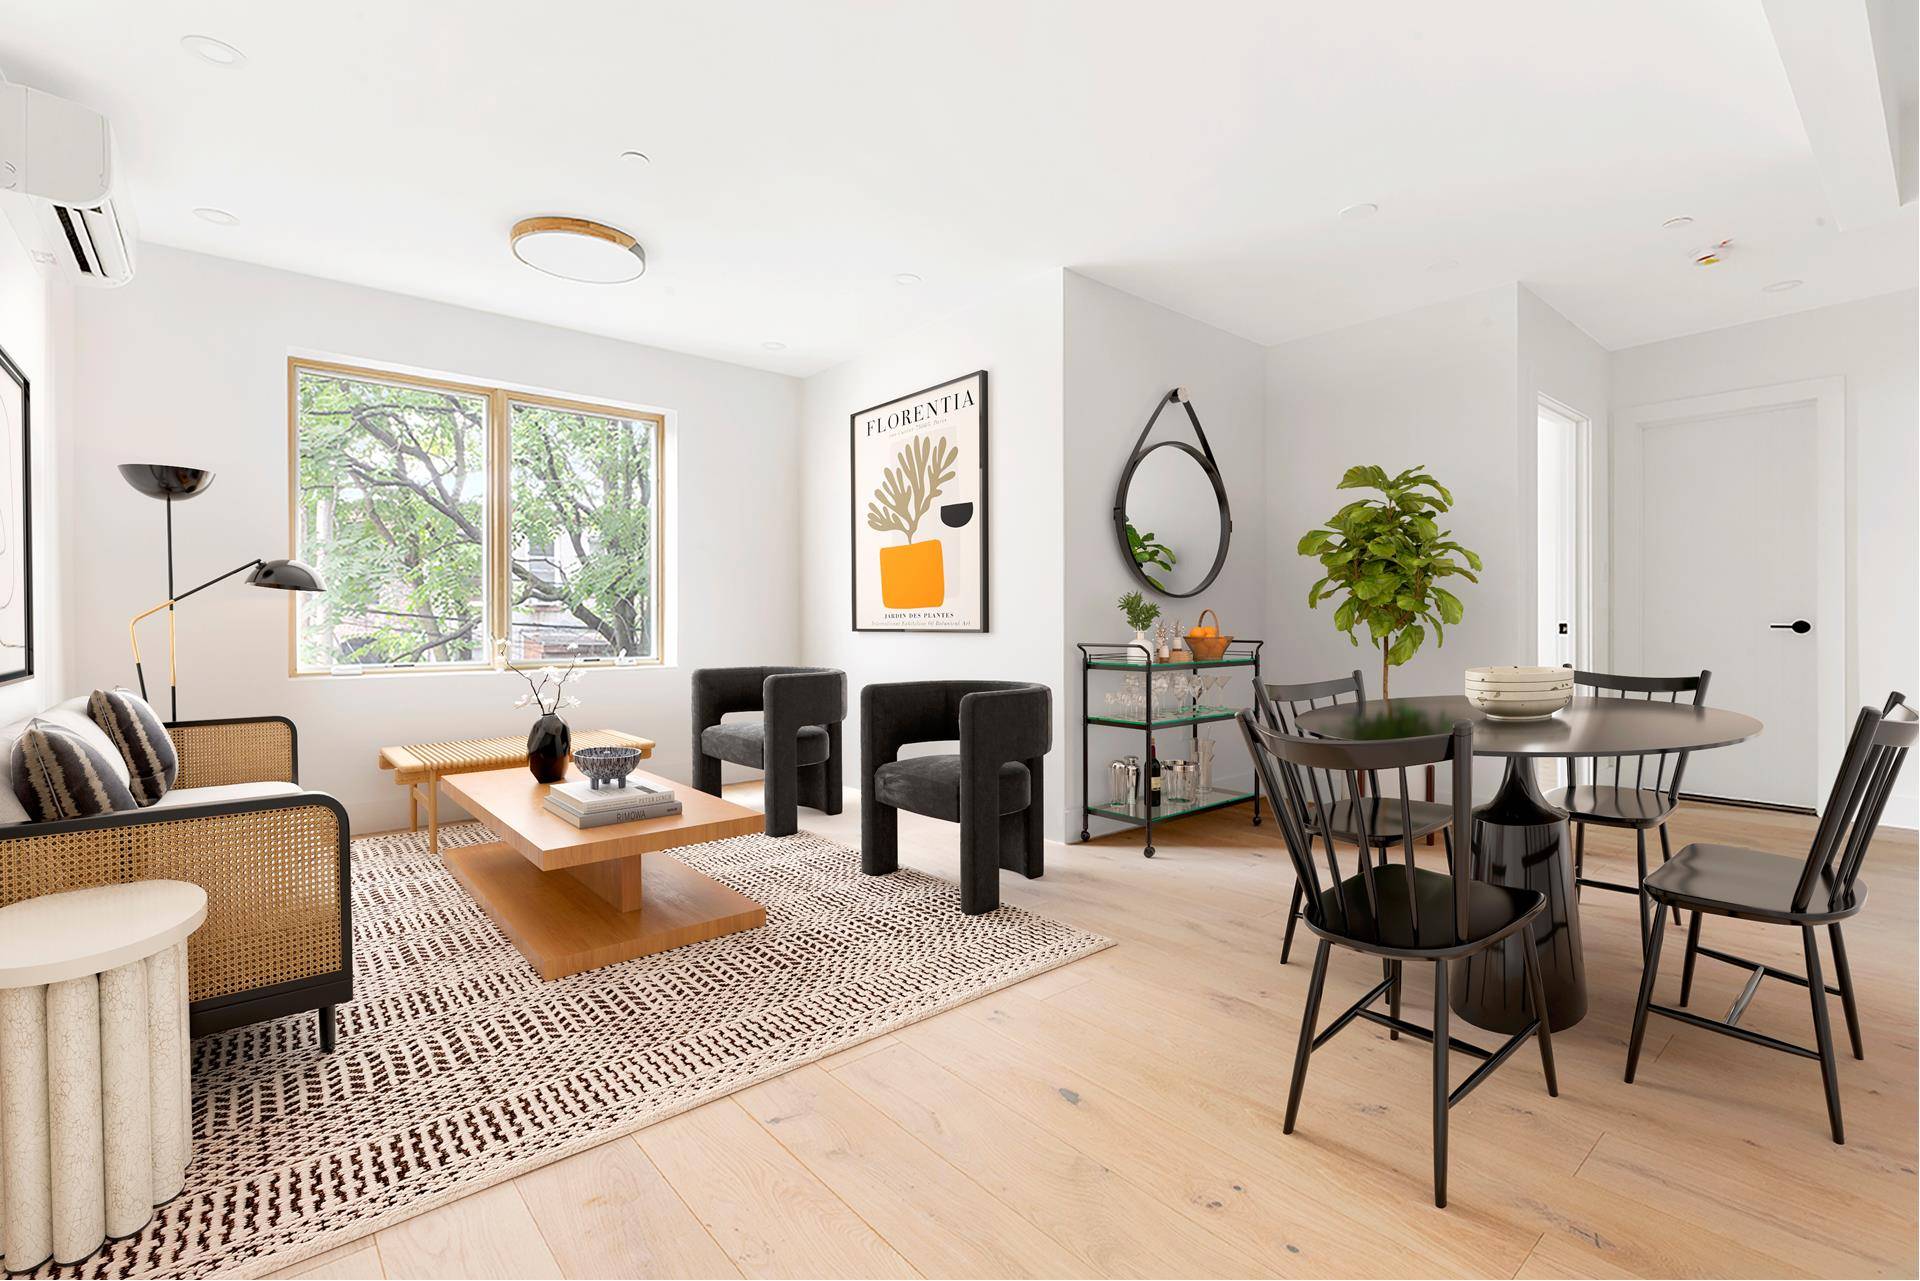 Welcome to 689 Quincy Street ; a new, seductively designed eight residence condominium nestled peacefully aside Quincy Street's brownstones and tranquil greenery.